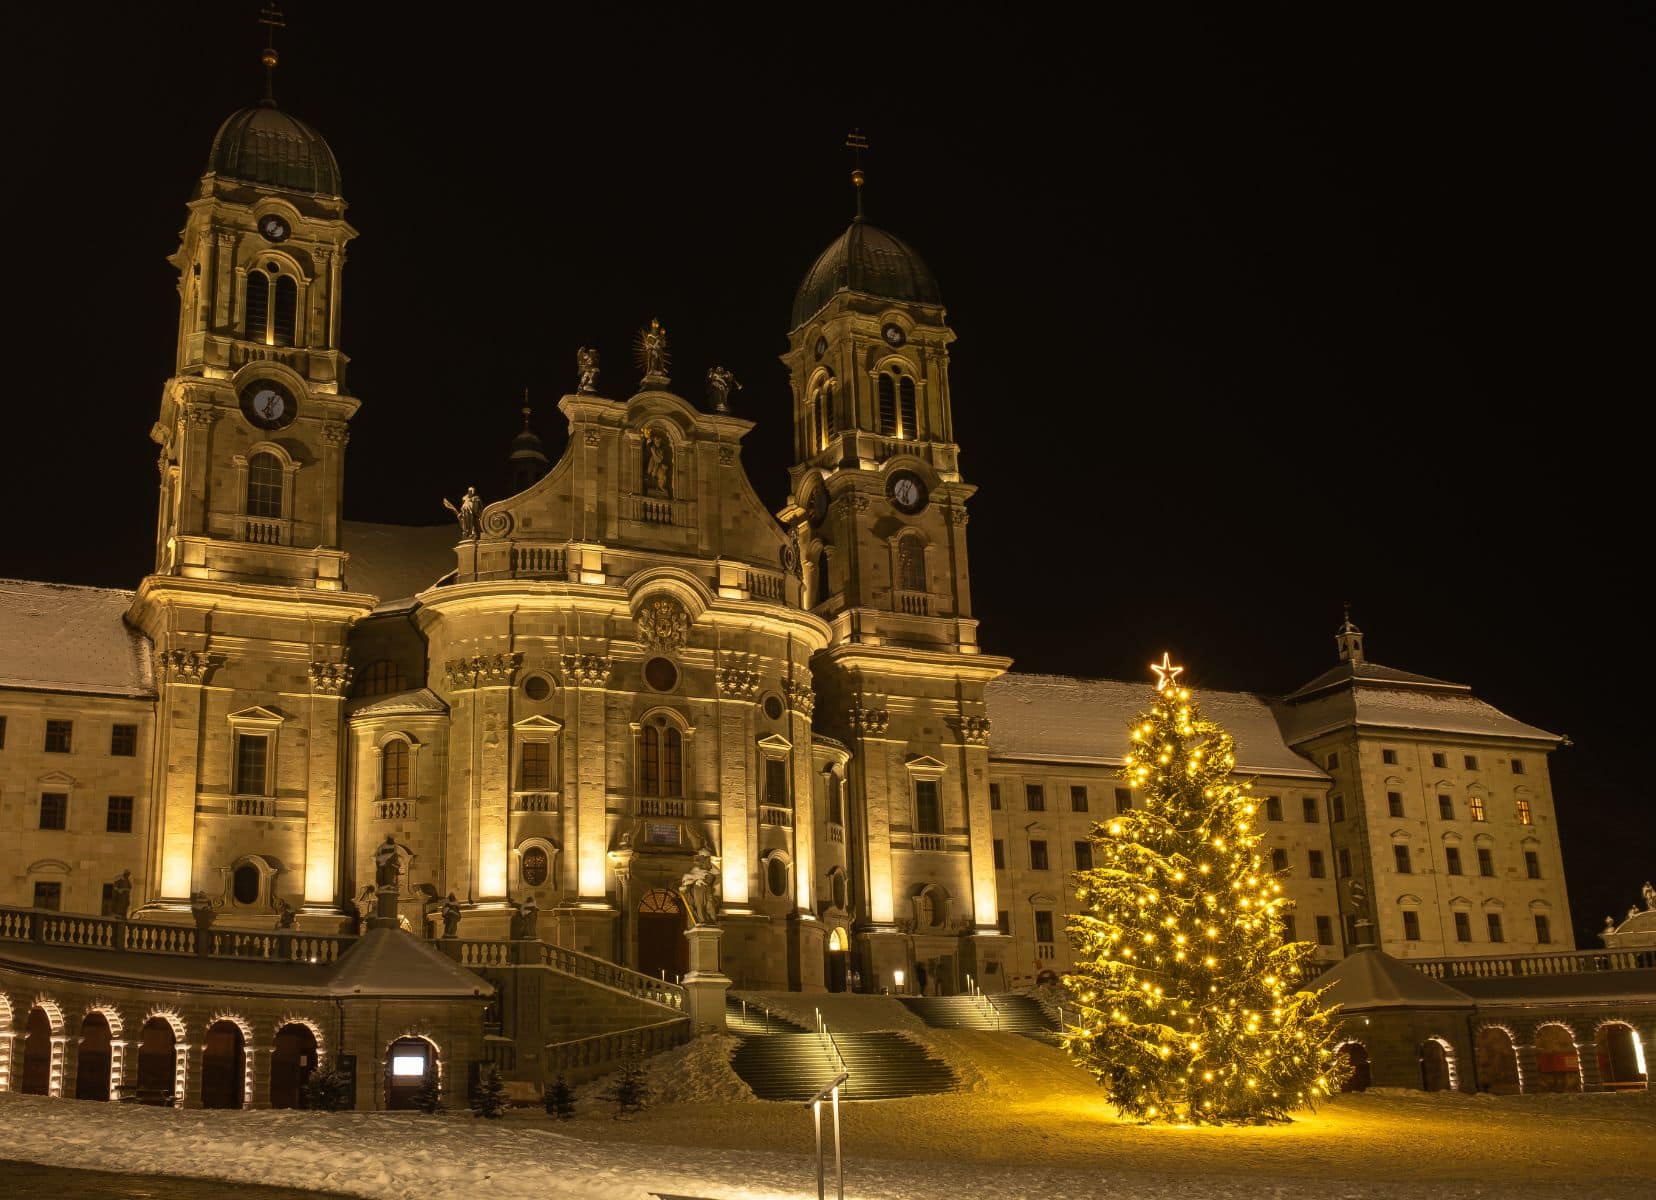 Einsiedeln Abbey with a Christmas tree in front of it.